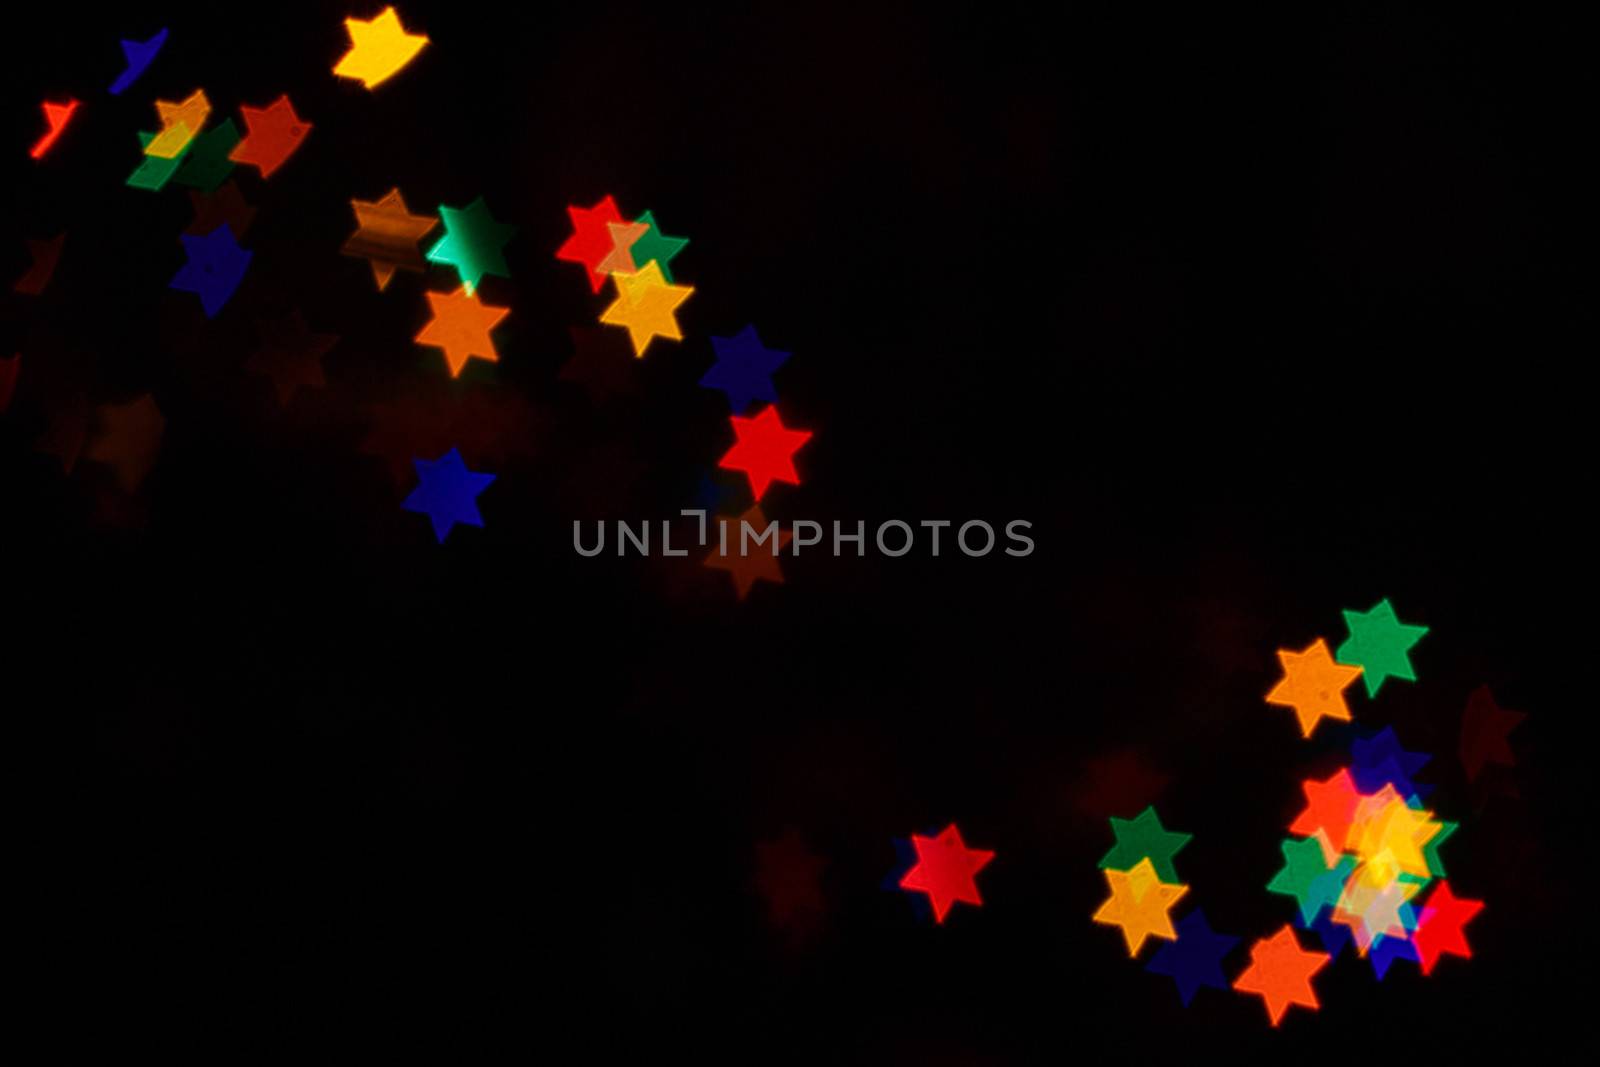 Abstract background for Hanukkah by Vagengeym